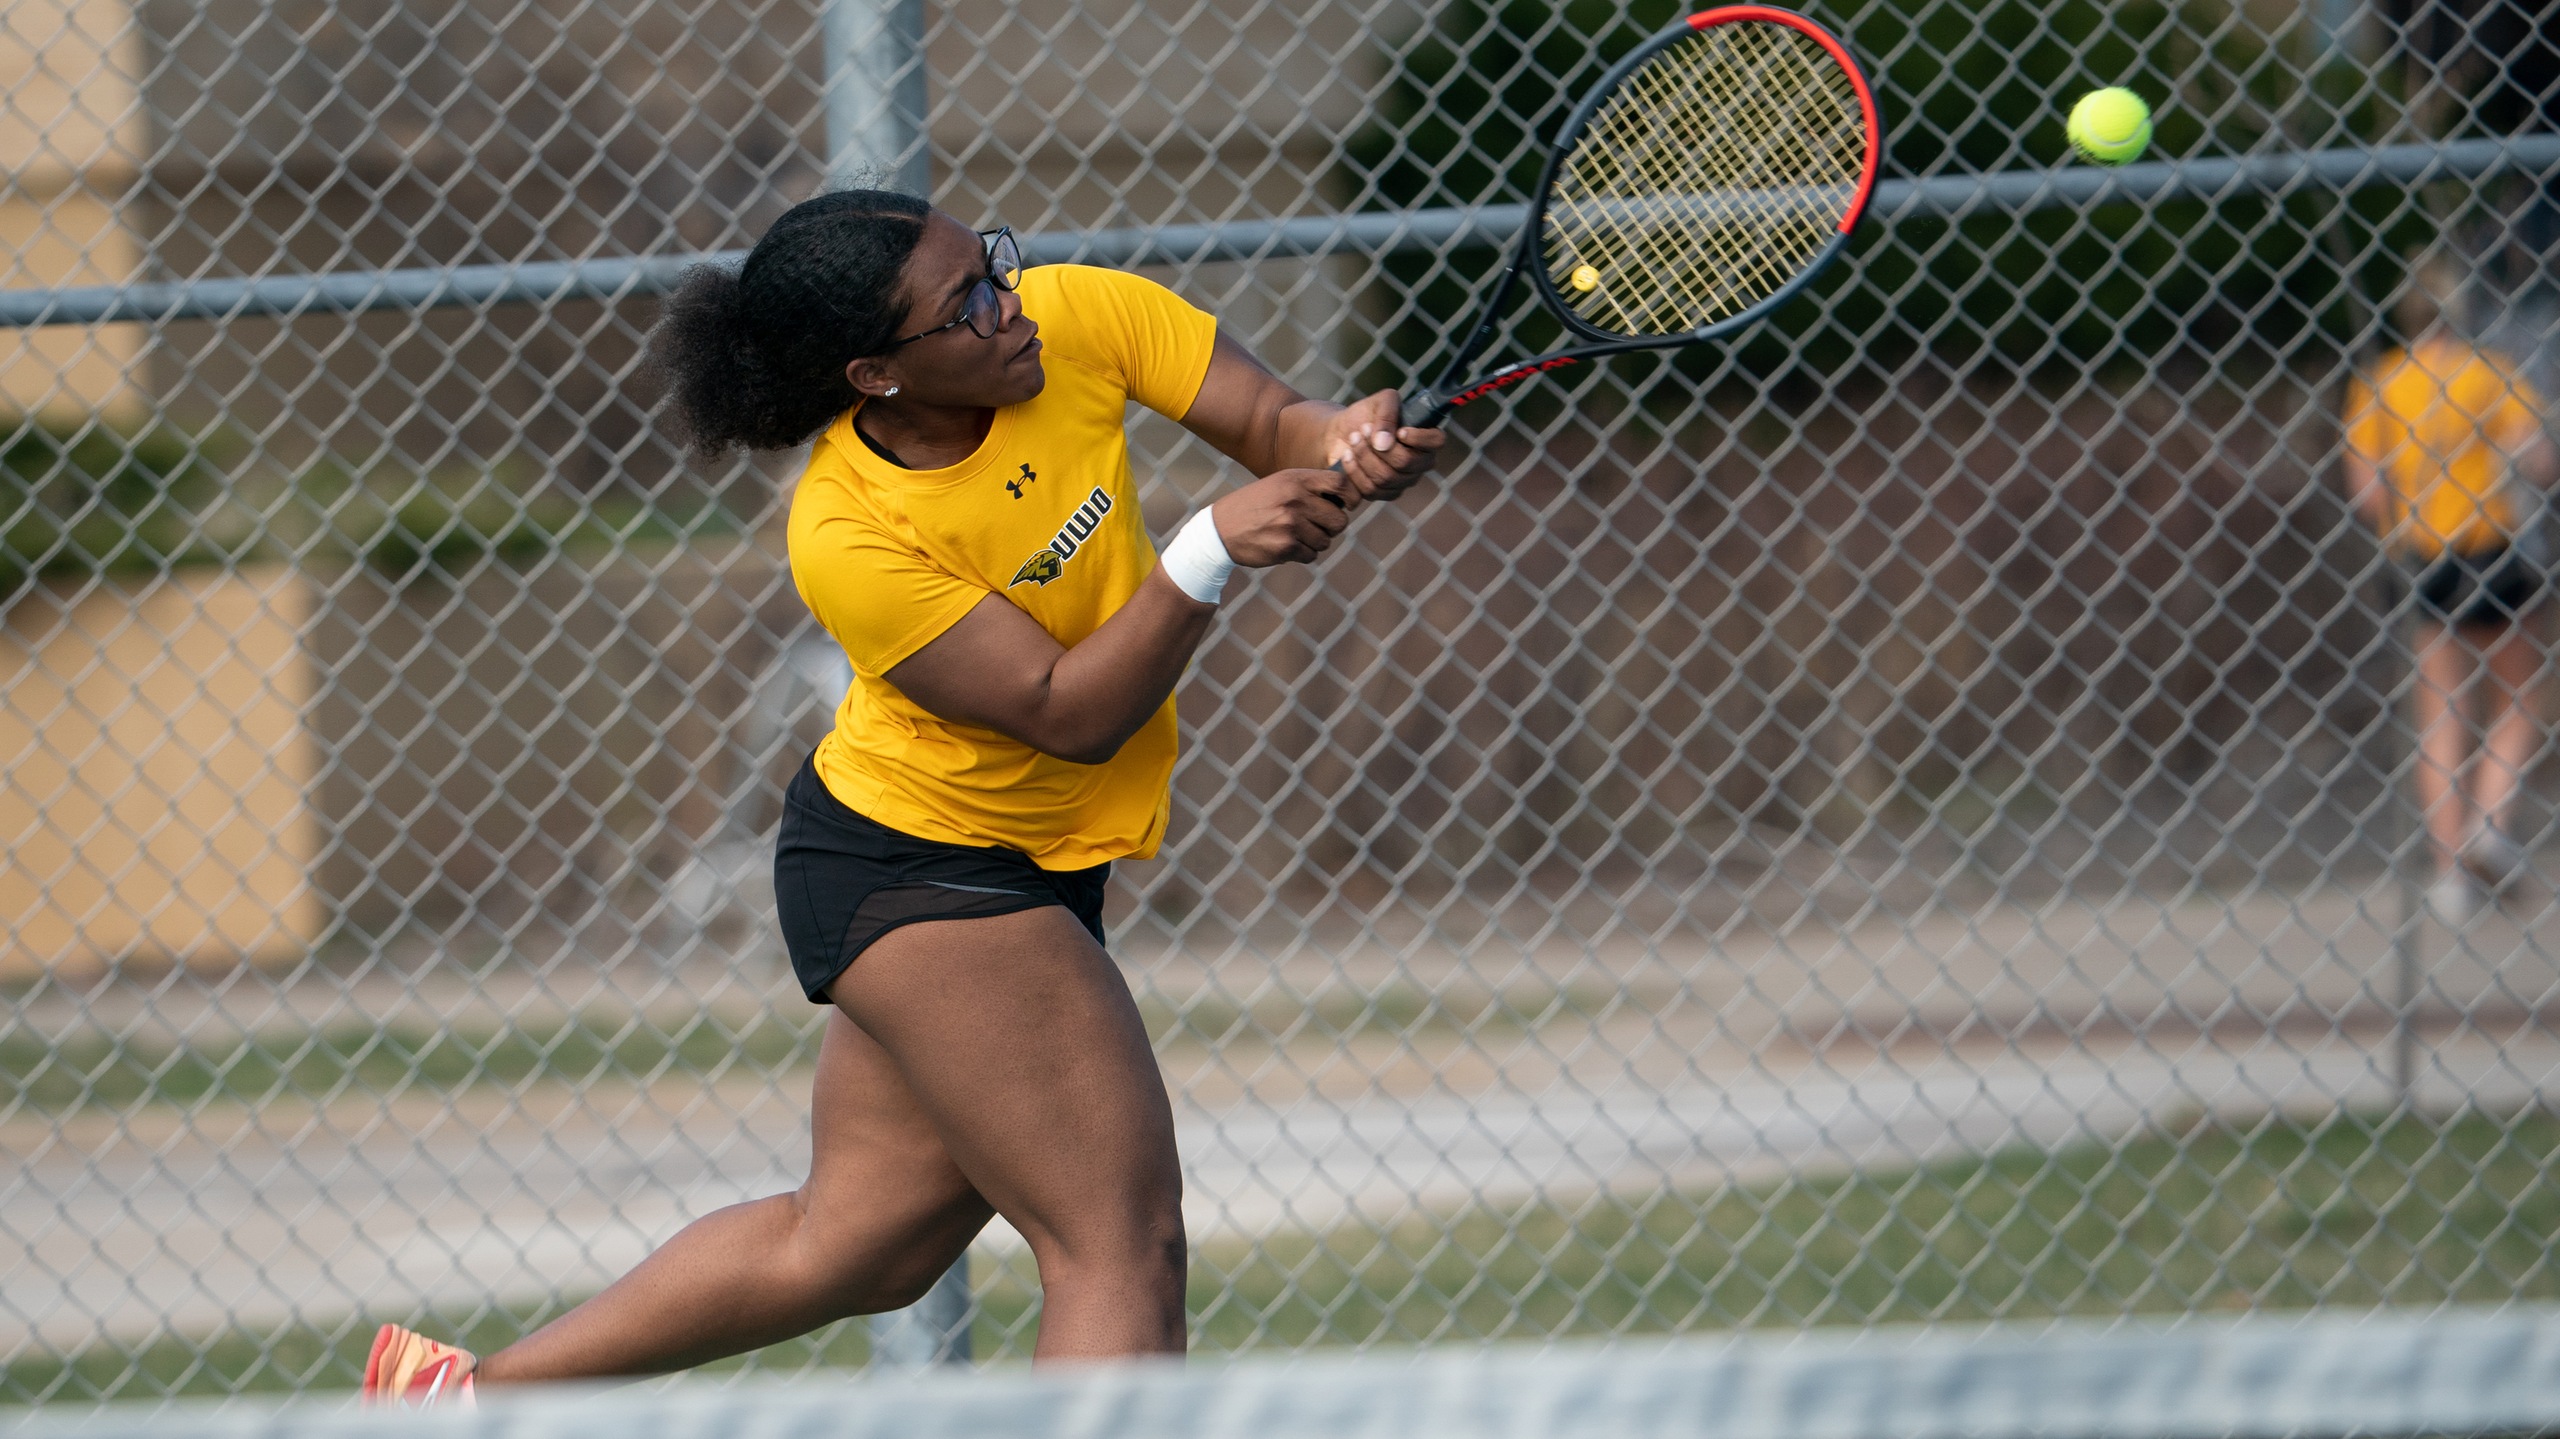 Michelle Spicer lost a hard-fought 3-6, 6-3 (10-8) decision to UW-Stevens Point's Barbara Covek at No. 1 singles.